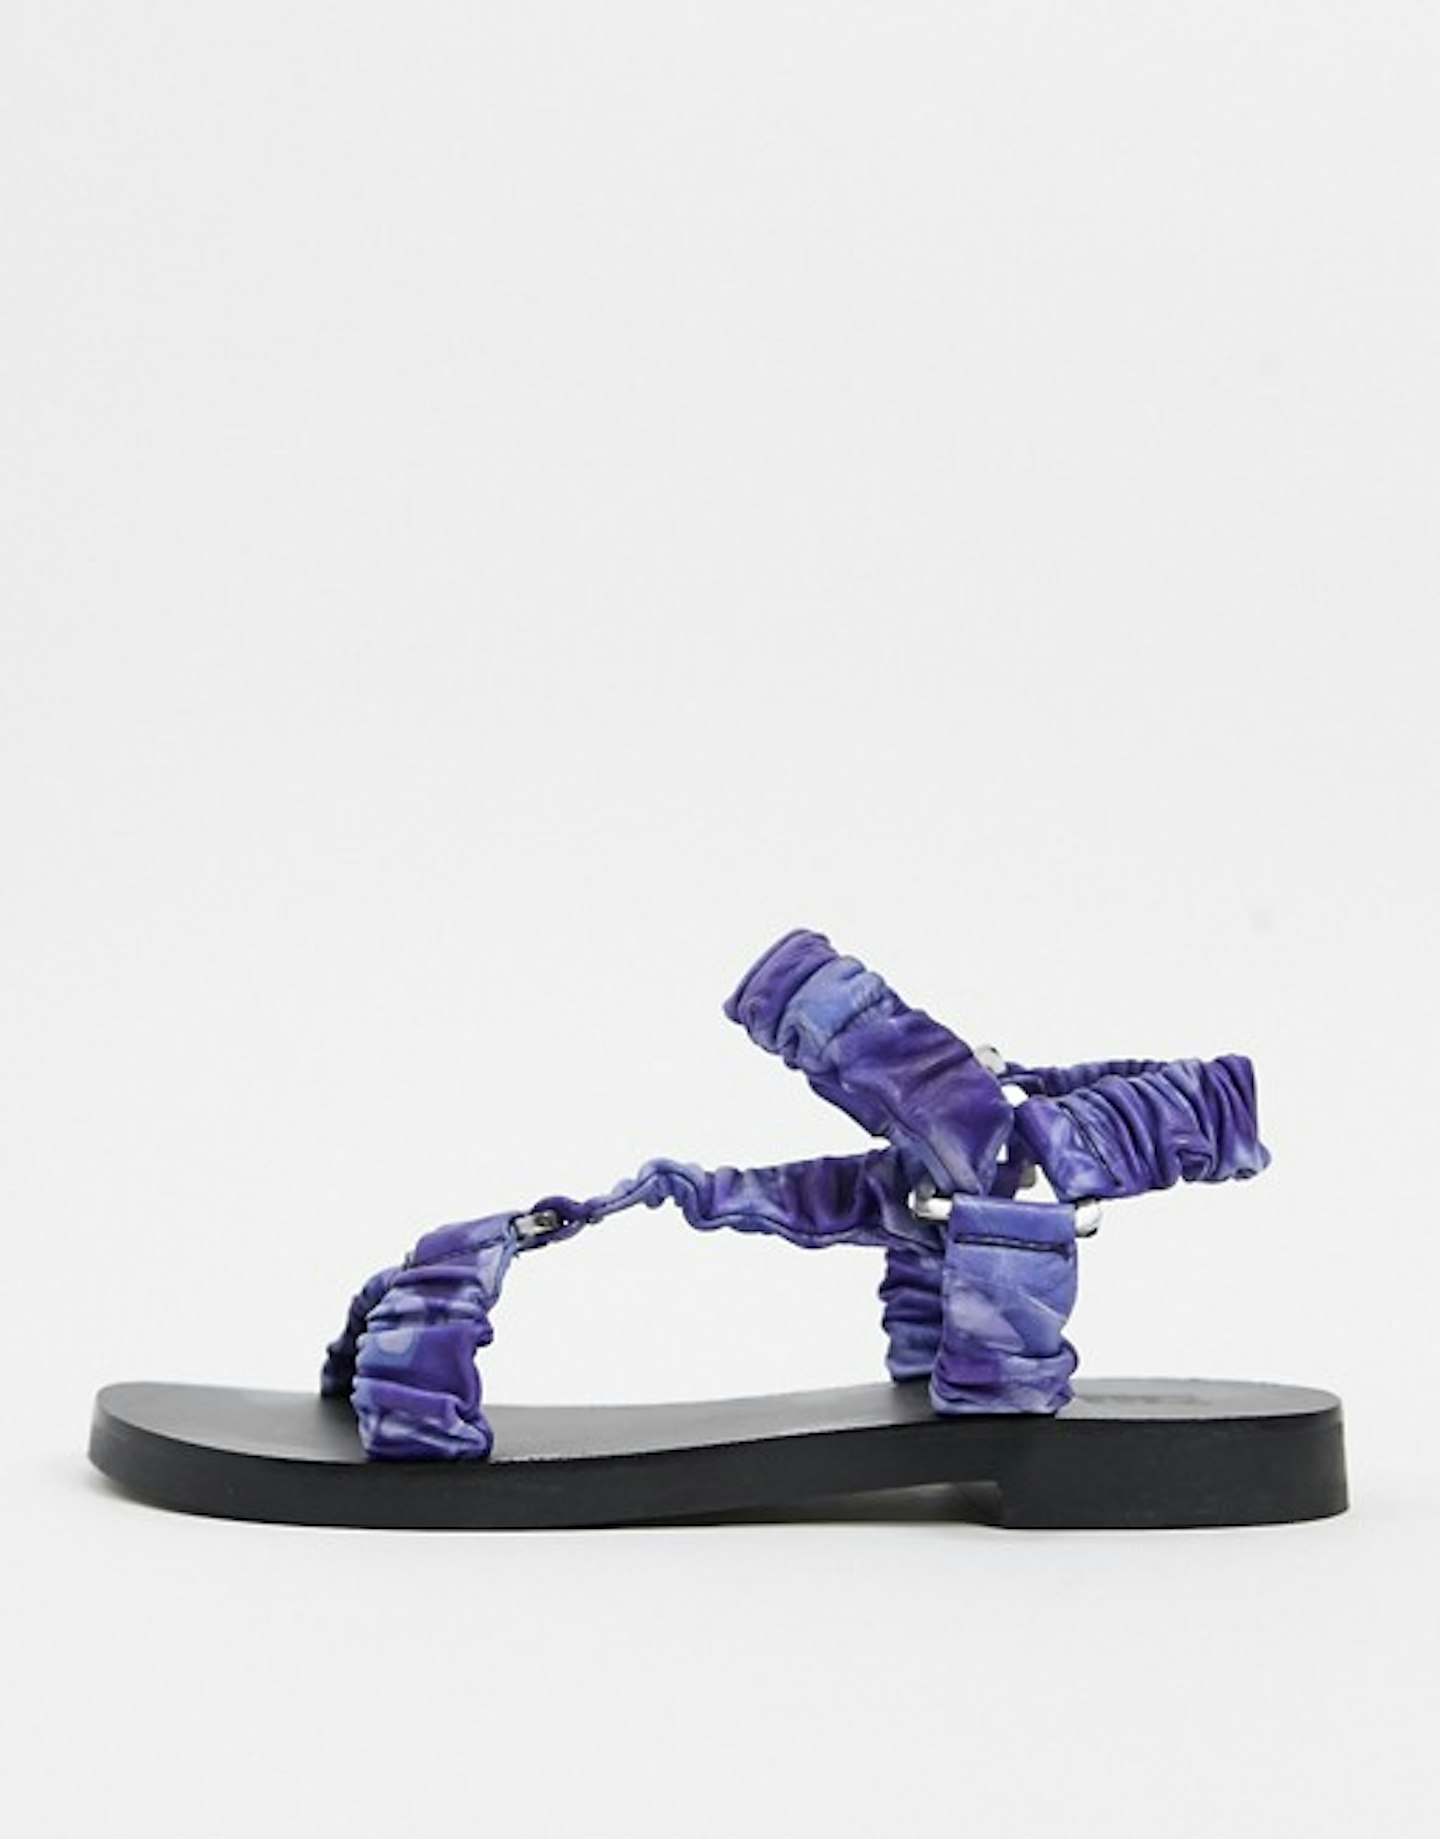 ASOS, Sporty Leather Sandals, £40